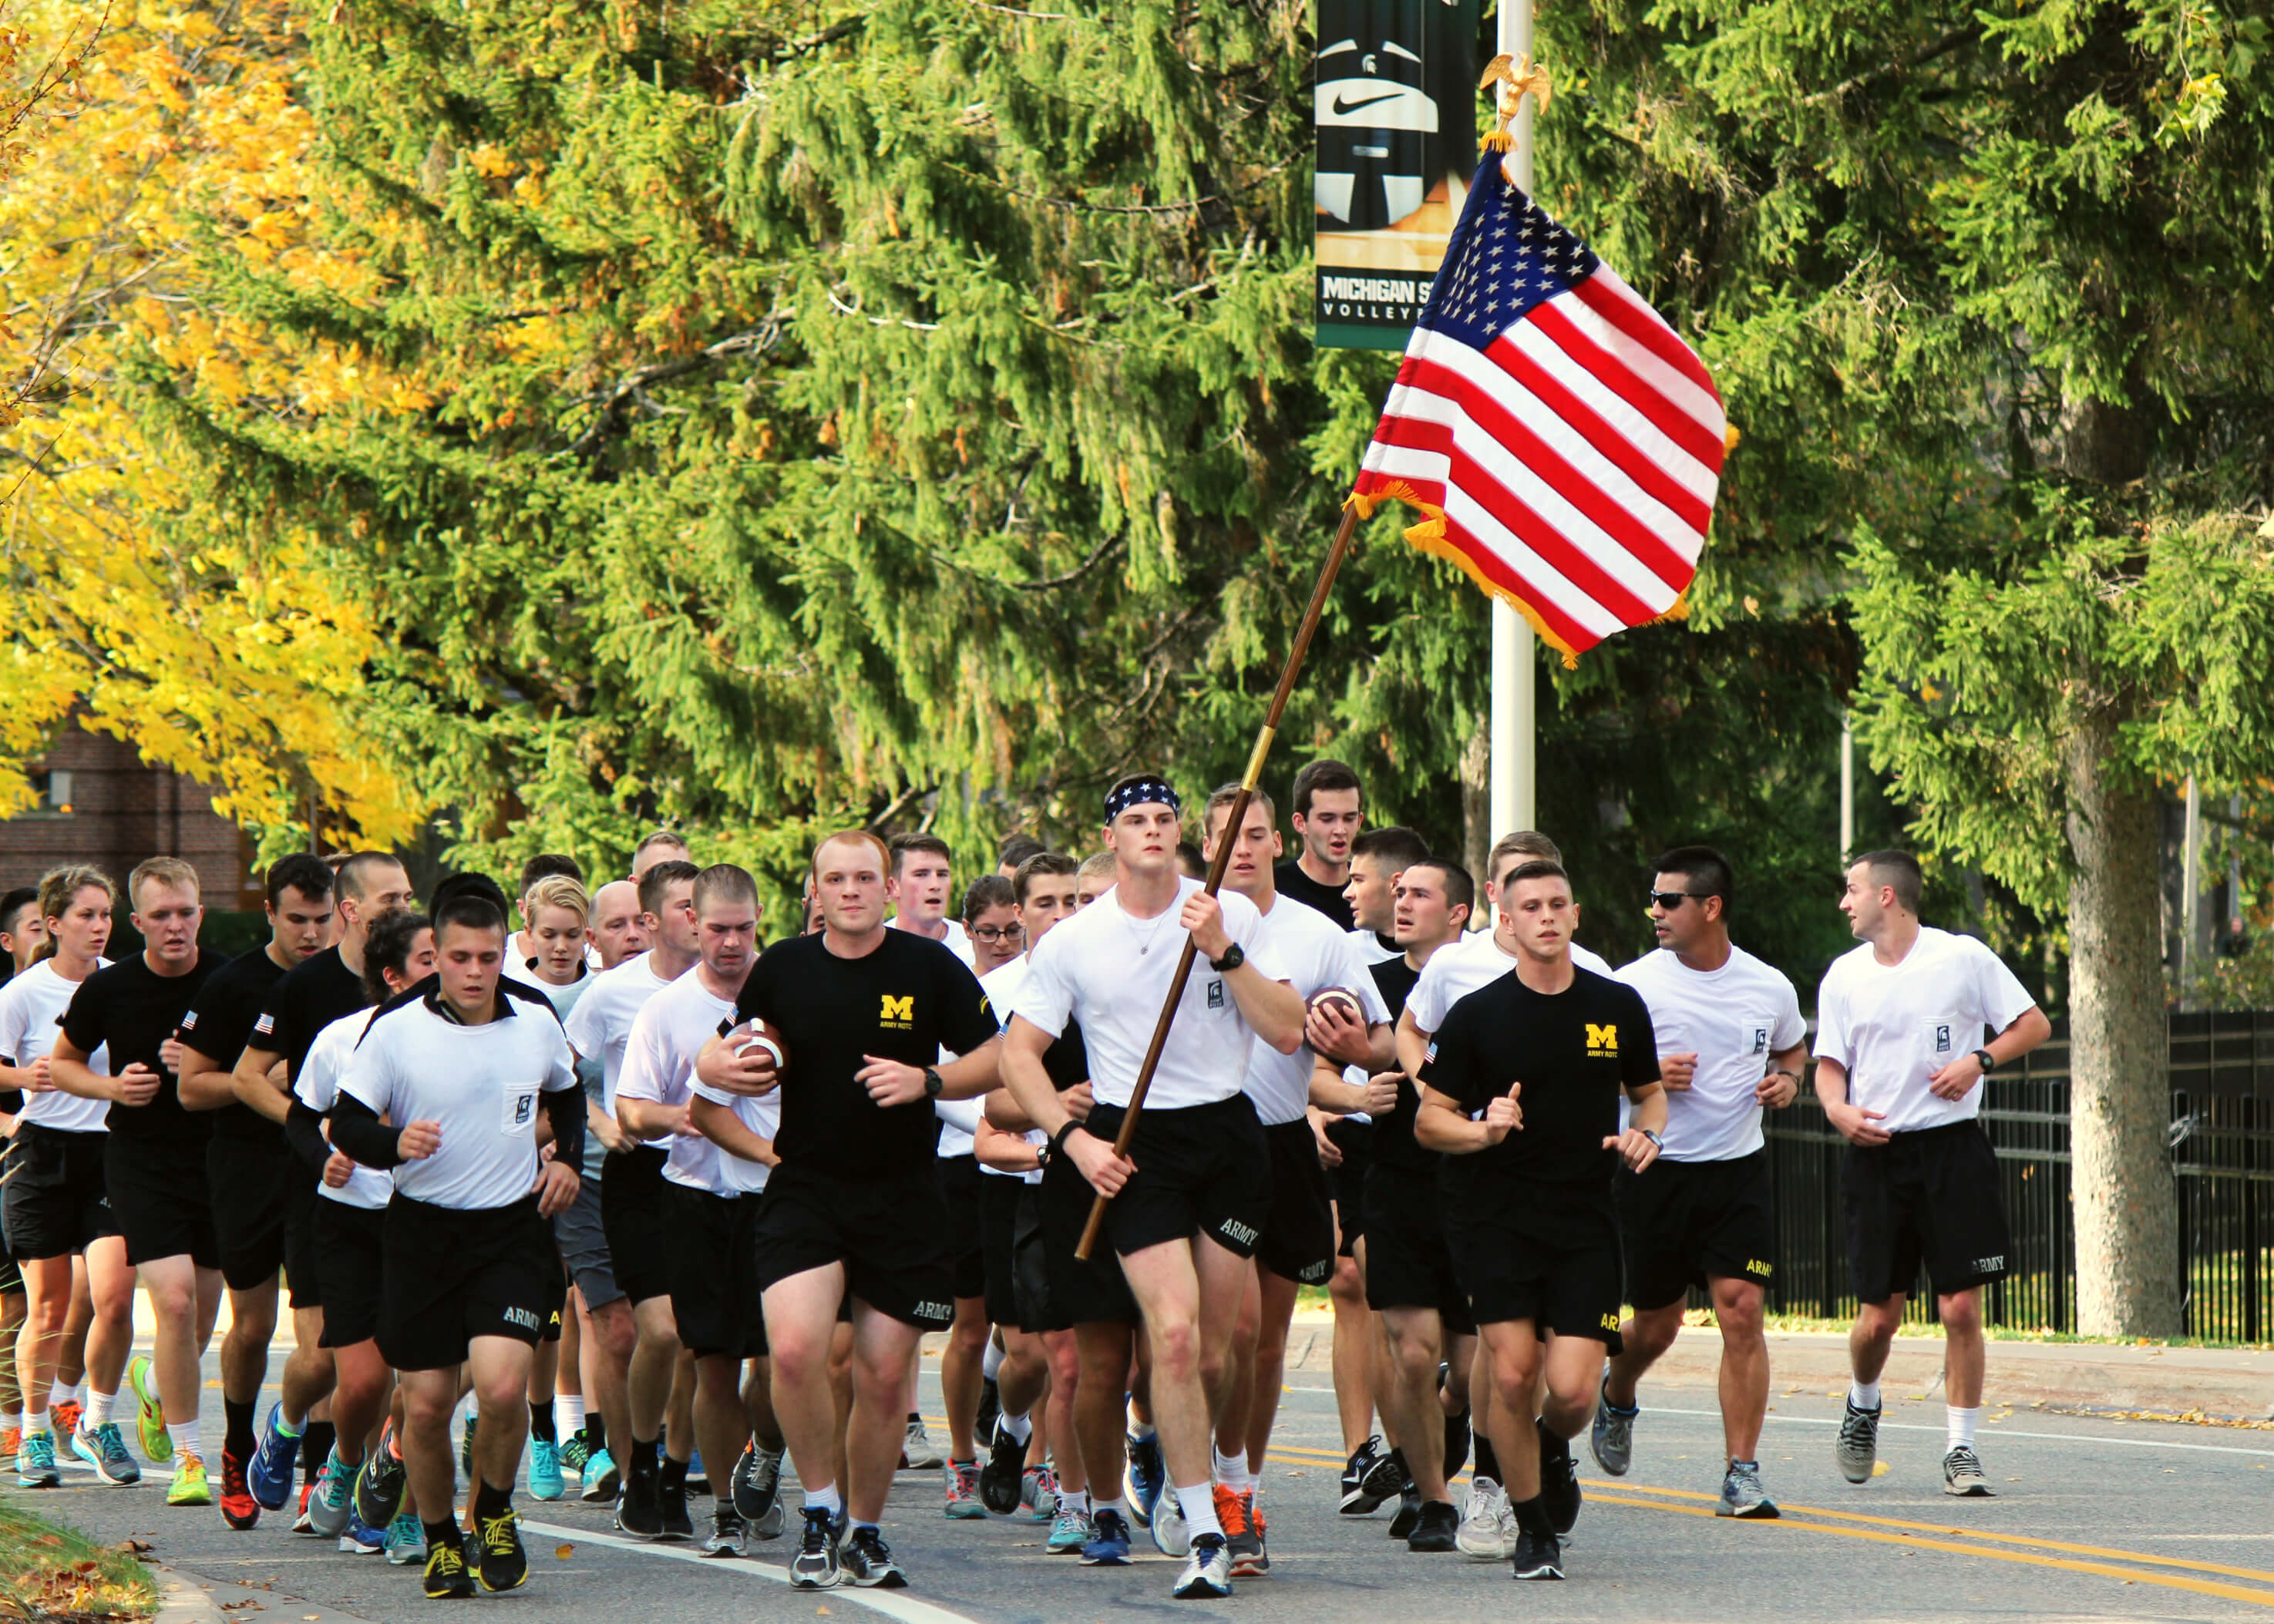 A team of football players running together carrying an American flag